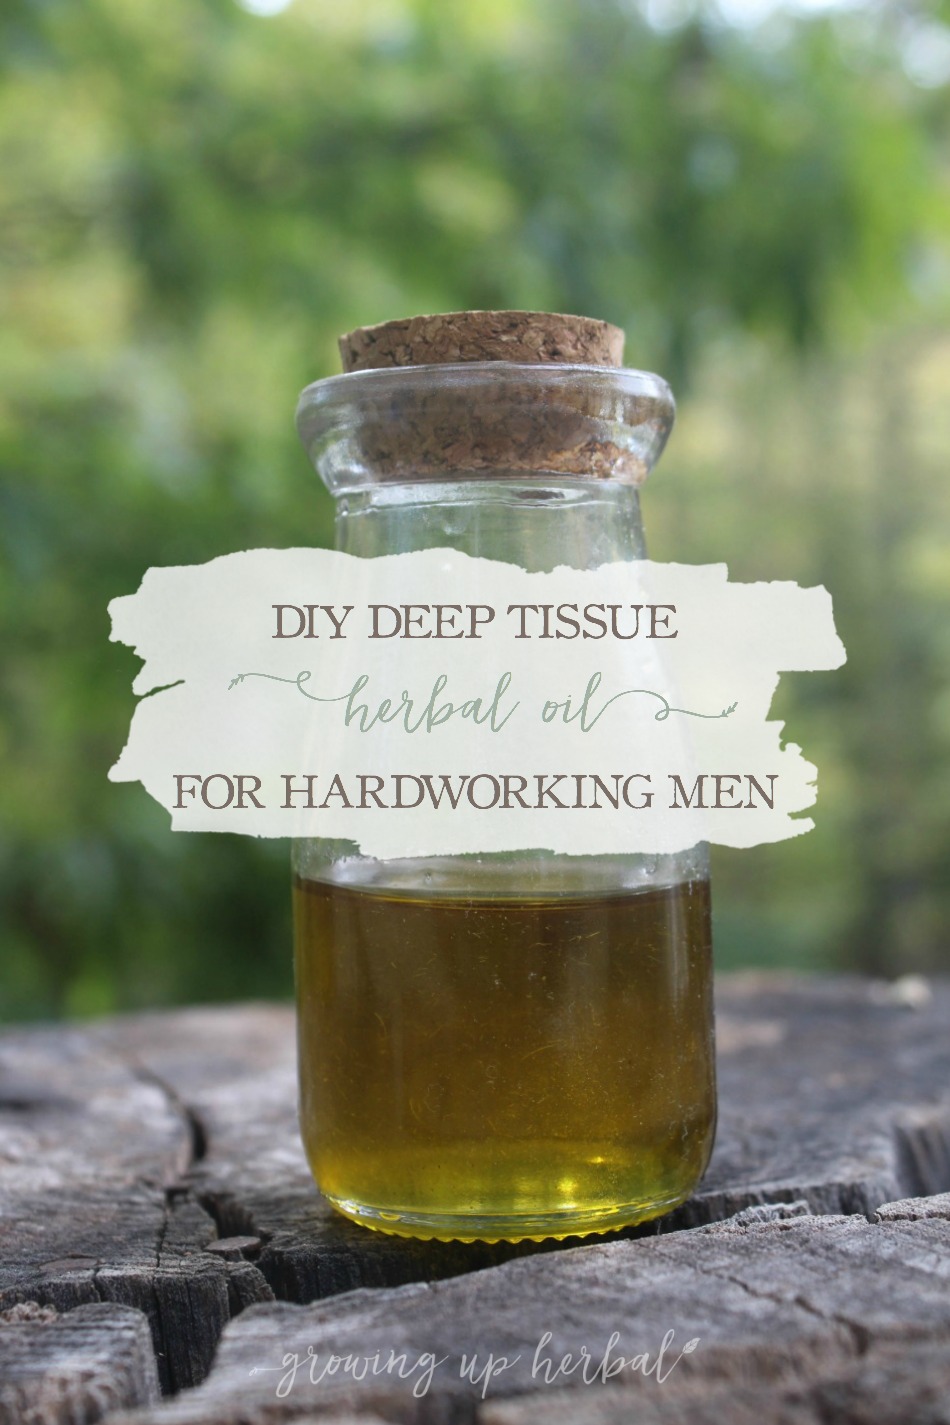 DIY Deep Tissue Herbal Oil For Hardworking Men | Growing Up Herbal | Here’s an herbal recipe to help soothe sore, achy muscles (and more). Perfect for the hardworking man in your life!